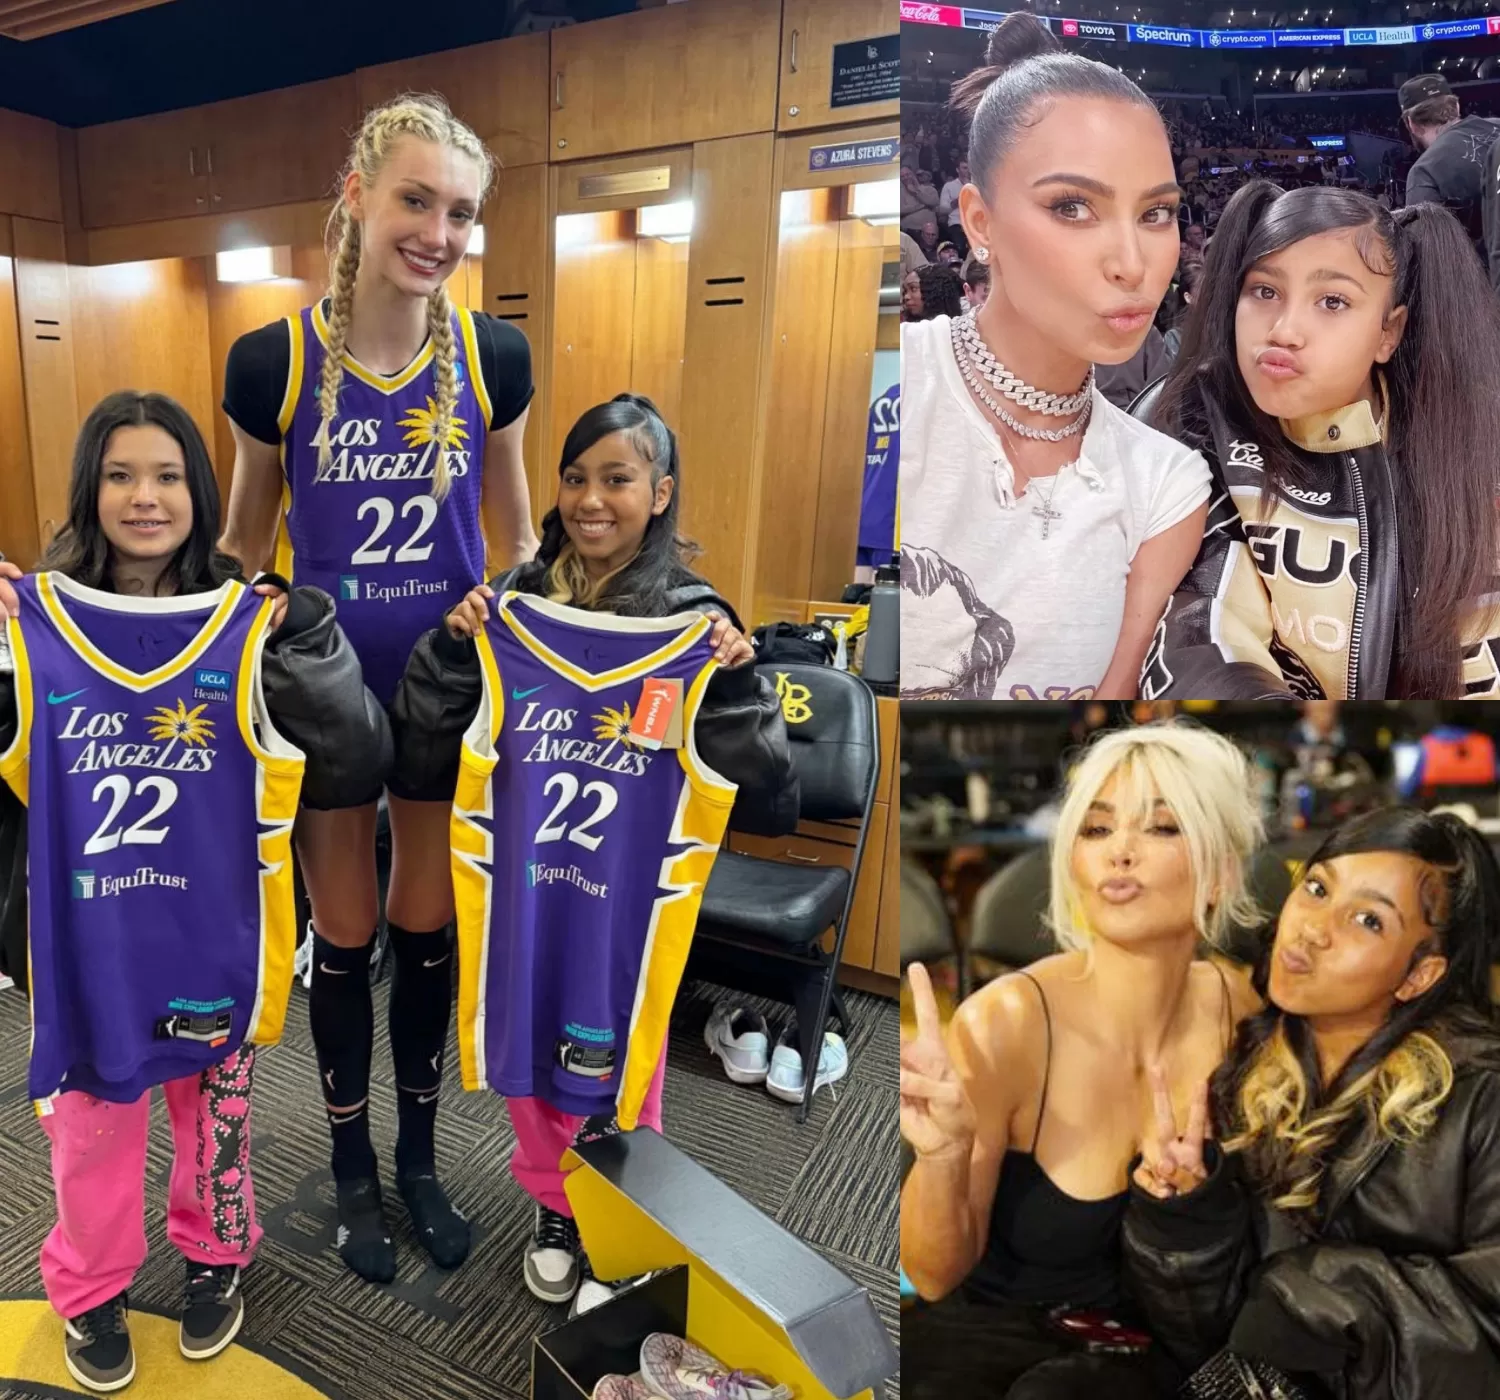 Cover Image for North West debuts new blonde hairdo alongside Kim Kardashian at women’s basketball game